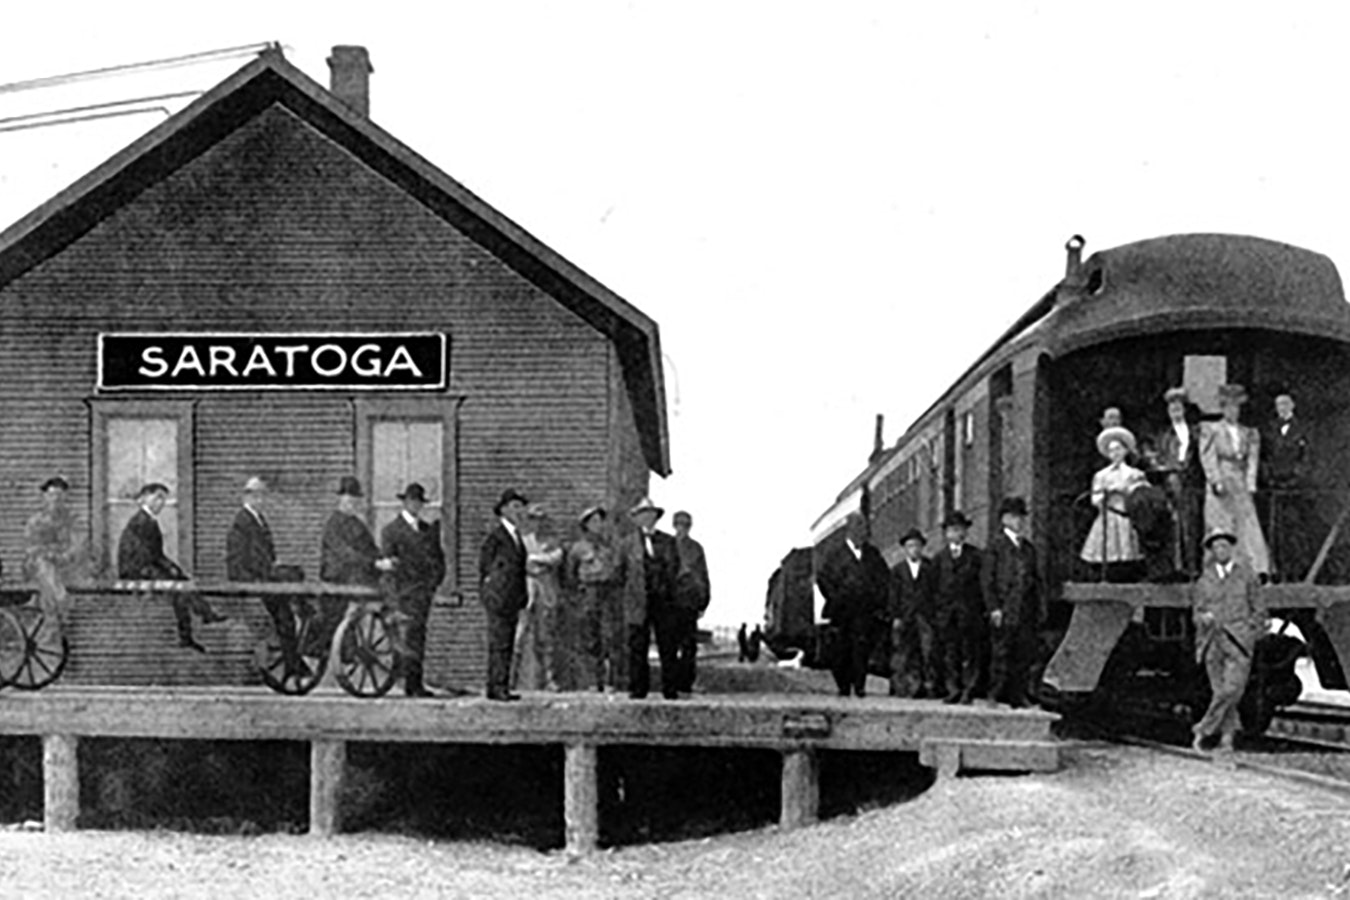 Traveling by train was an event in the early days of Wyoming. In this photo at the Saratoga station, travelers are dressed in their Sunday best to get on the train.